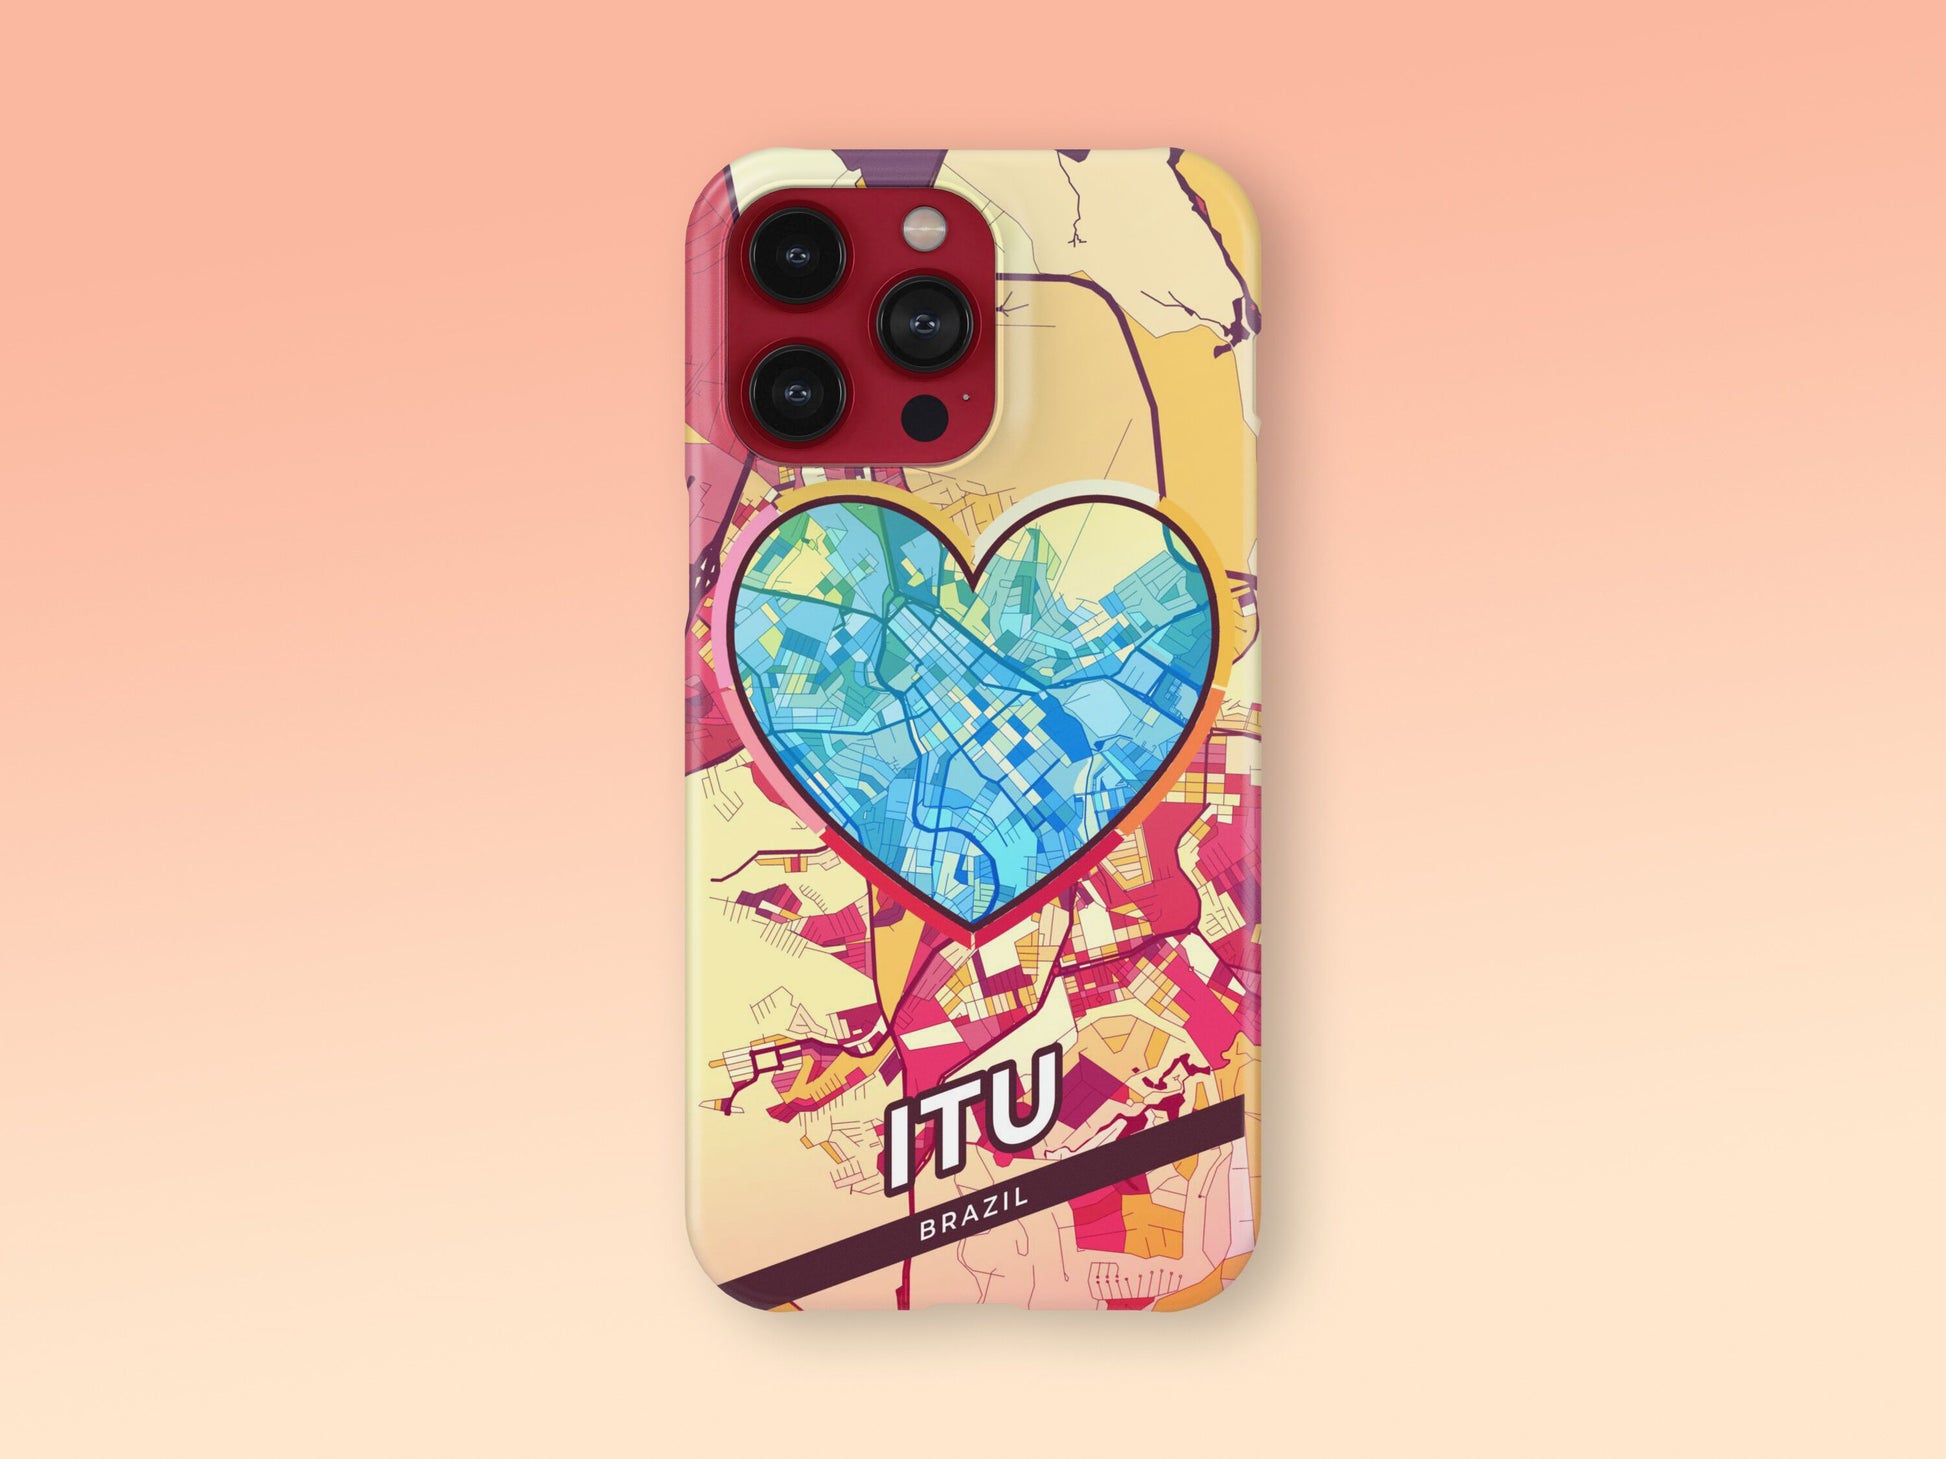 Itu Brazil slim phone case with colorful icon. Birthday, wedding or housewarming gift. Couple match cases. 2